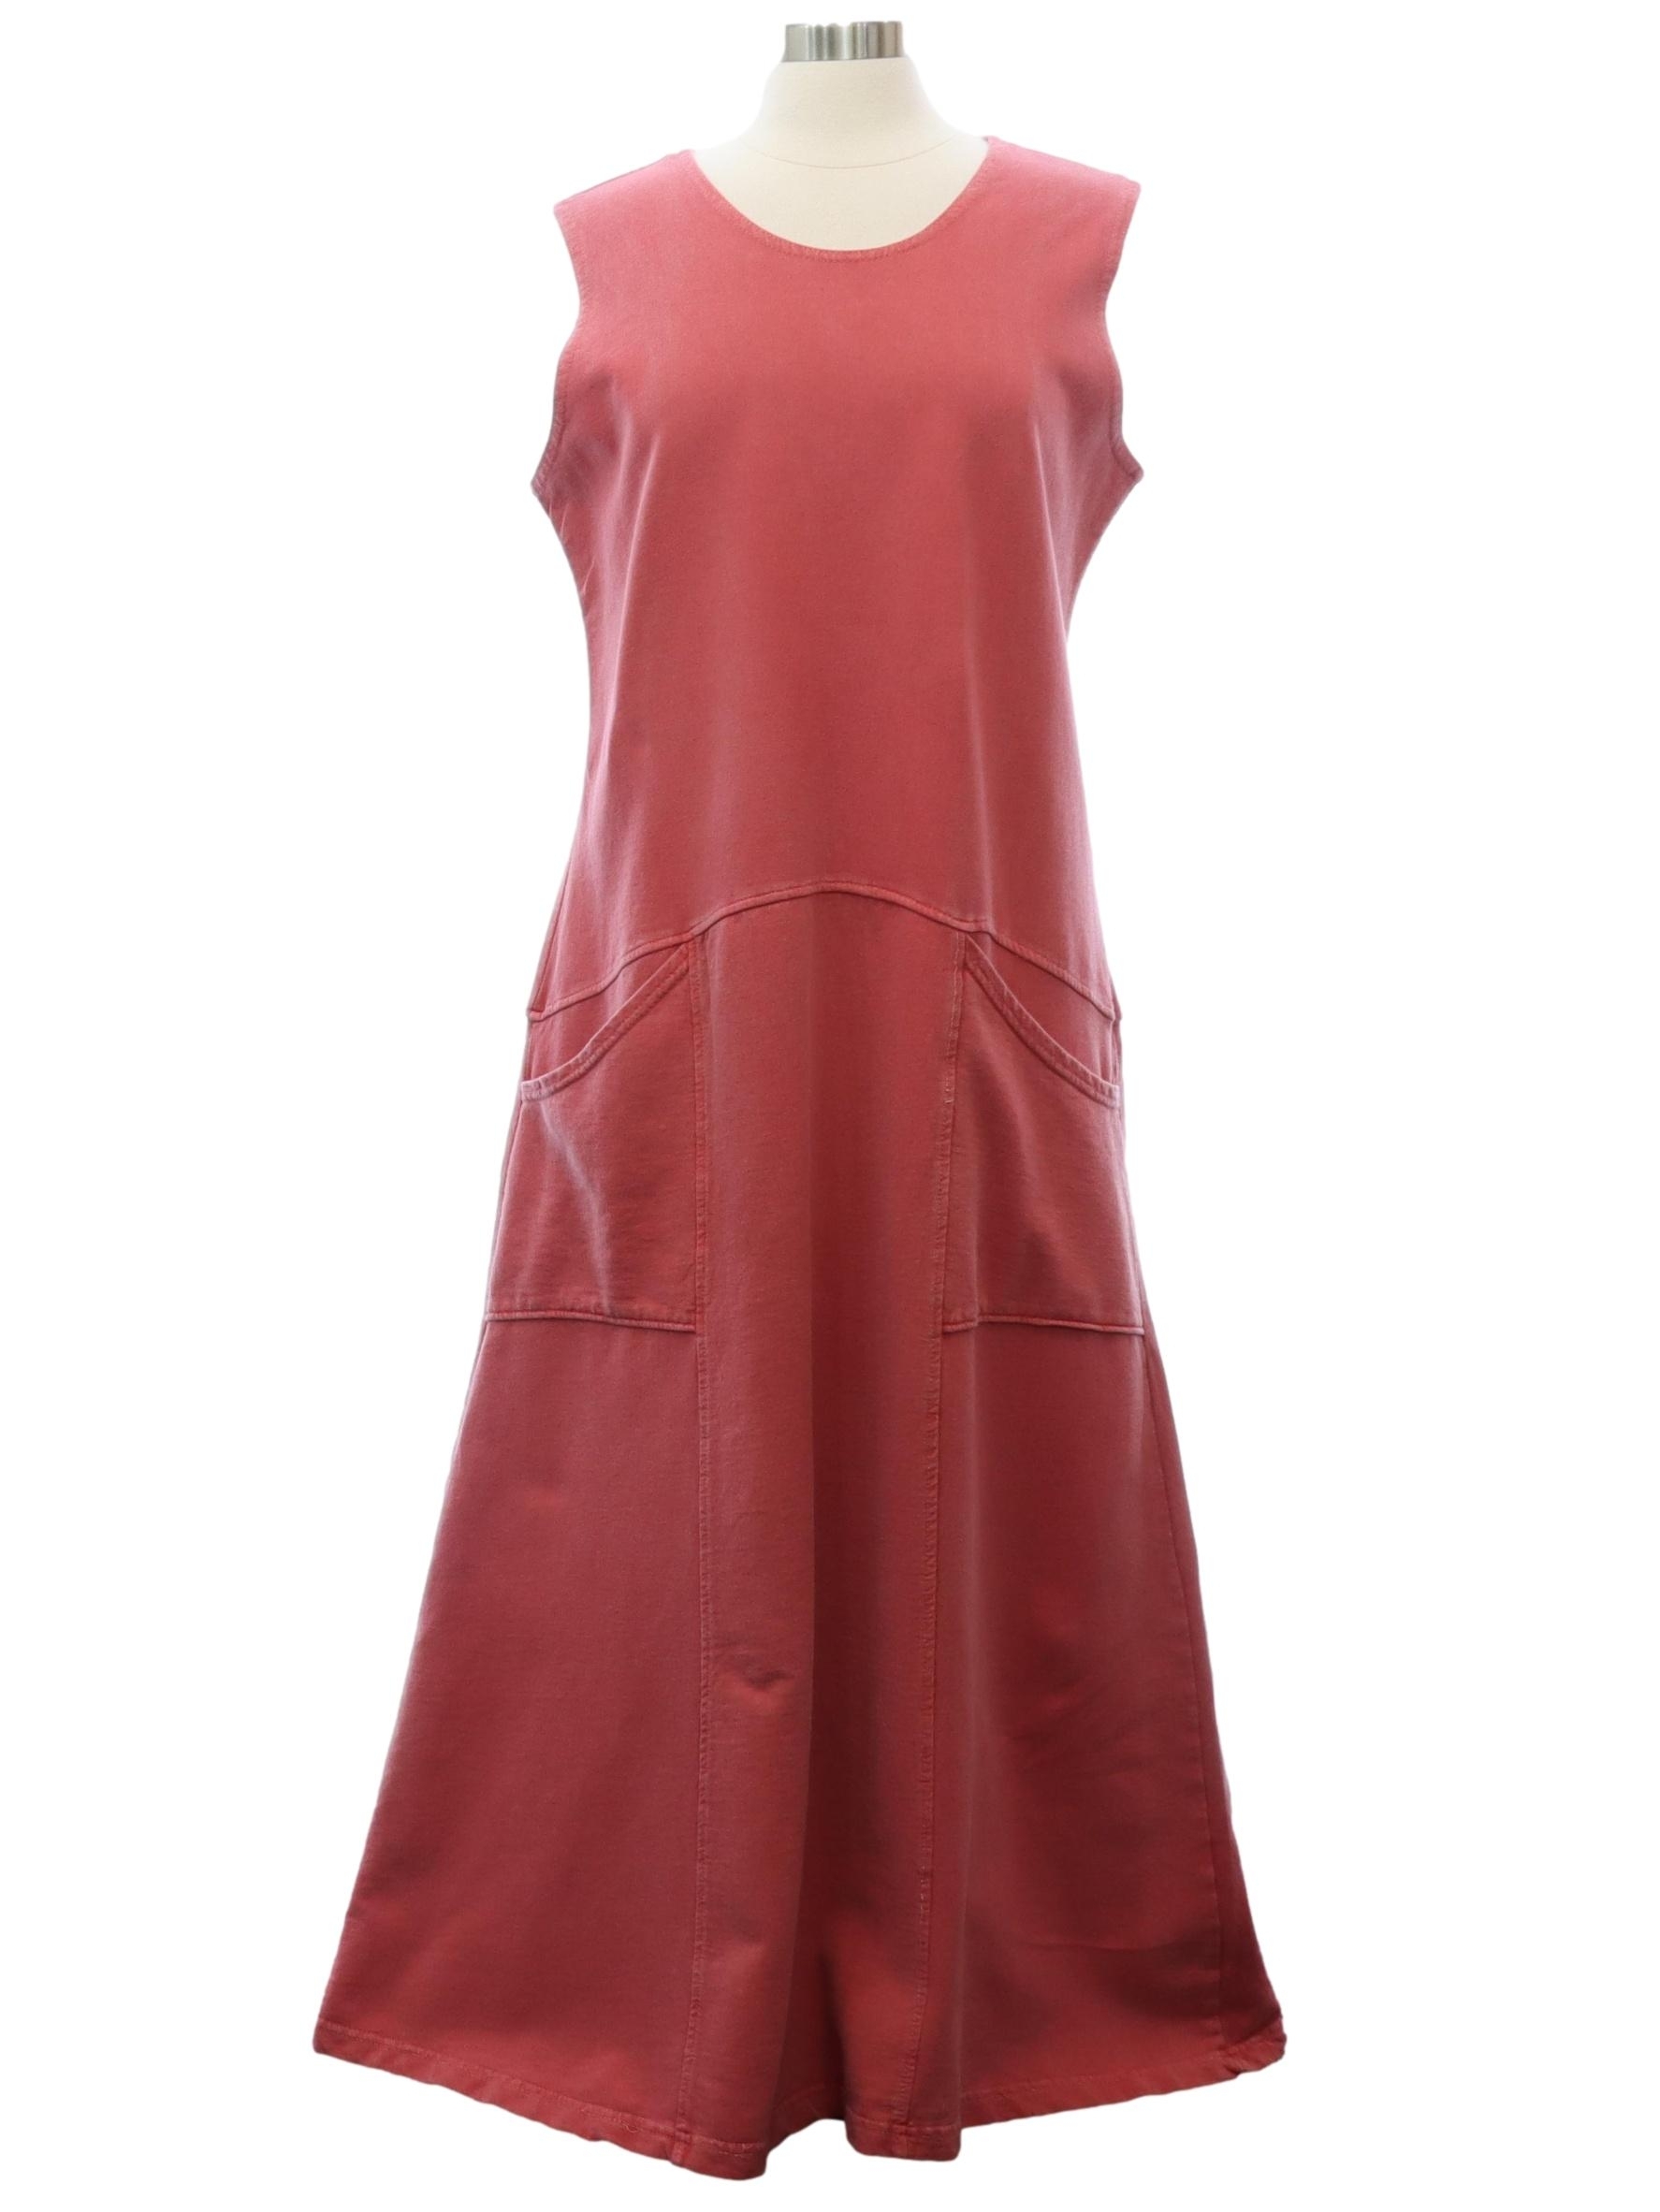 Nineties N. Y. L. T Shirt: Late 90s or Early y2k 2000s -N. Y. L.- Womens  dusty rose thick cotton jersey sleeveless a-line maxi shift dress. Scoop  neck, basic bodice, a-line waist.